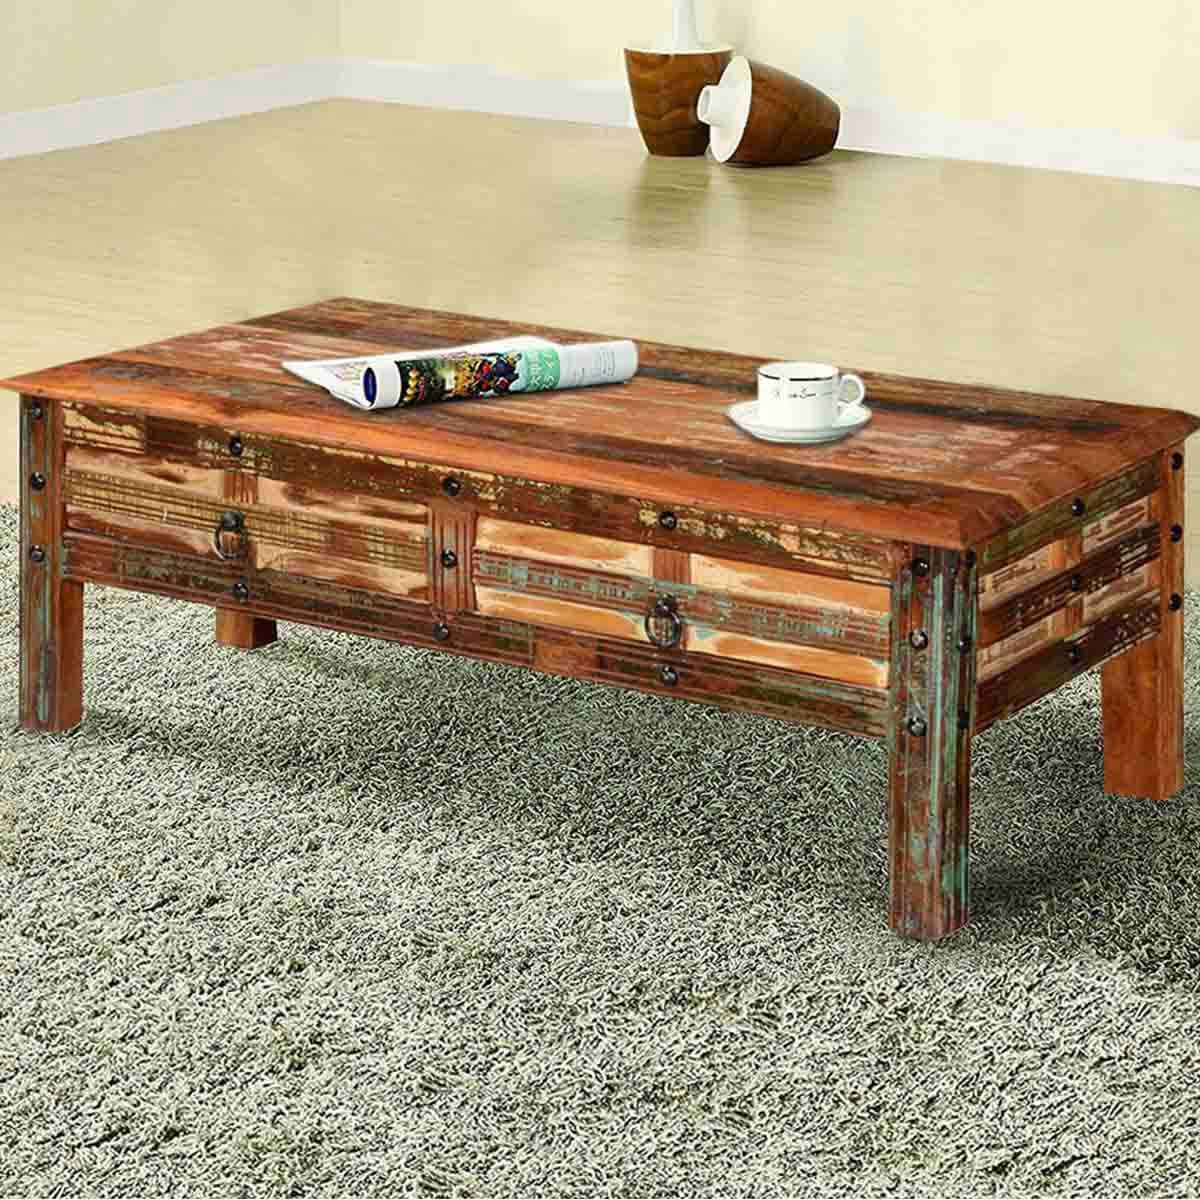 Rustic Light Wood Coffee Table – Canvas Broseph Inside Rustic Coffee Tables (View 19 of 20)